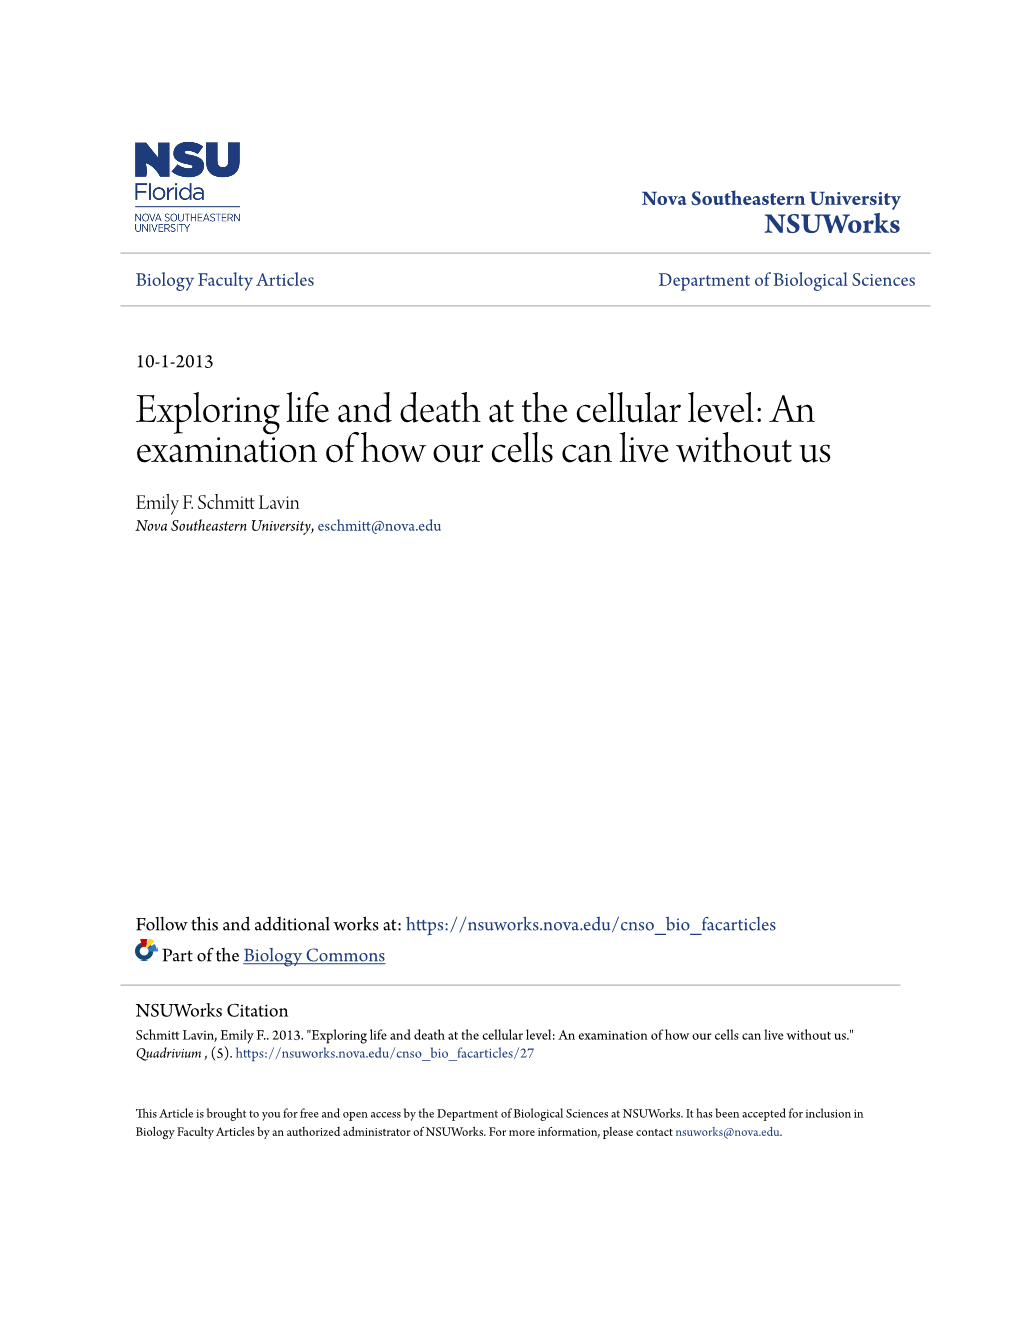 An Examination of How Our Cells Can Live Without Us Emily F